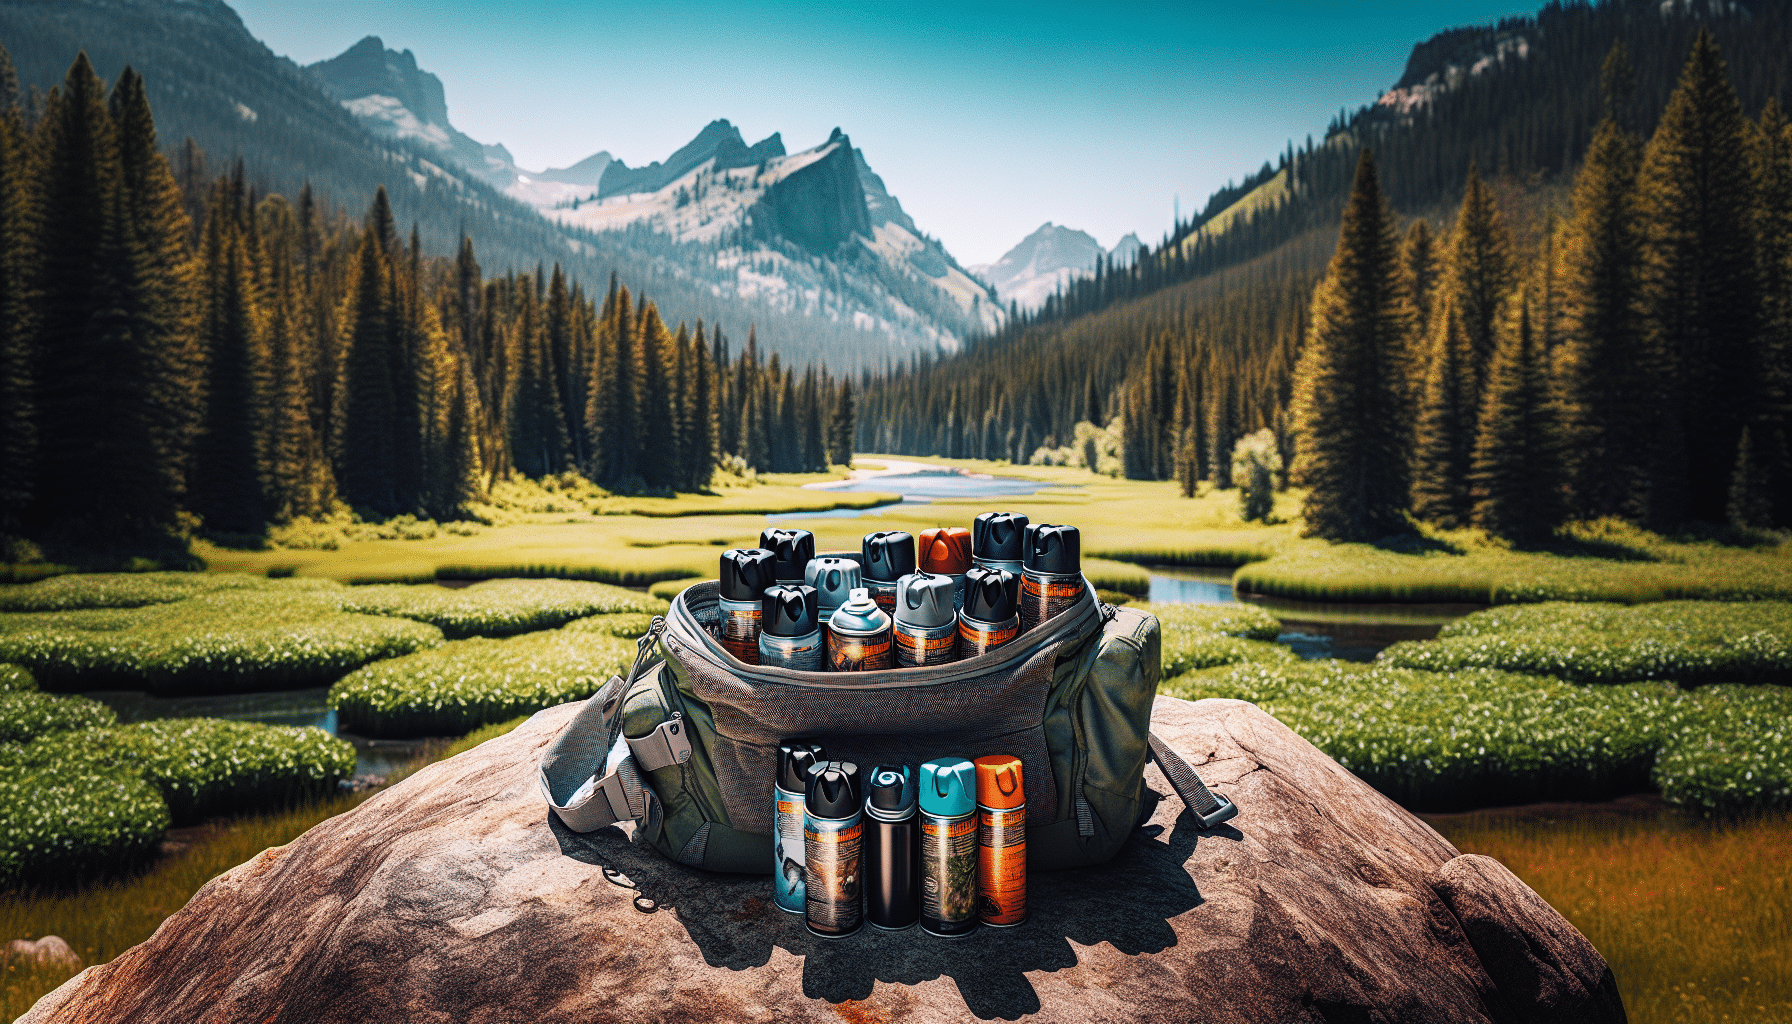 A hiker's bag lies open on a rock amidst the scenic beauty of the great outdoors. Visible inside the bag are several canisters of various sizes, possibly holding bear spray with their safety caps on, each having a unique shape, color and design. These canisters are positioned apart, without labels or text, allowing the viewer to focus on the design and aesthetics of the bear spray cans. The tranquil nature surrounding the rock provides a serene backdrop with lush green trees, blue sky, and distant mountains. The image is devoid of human presence, enhancing the calmness of the wilderness.